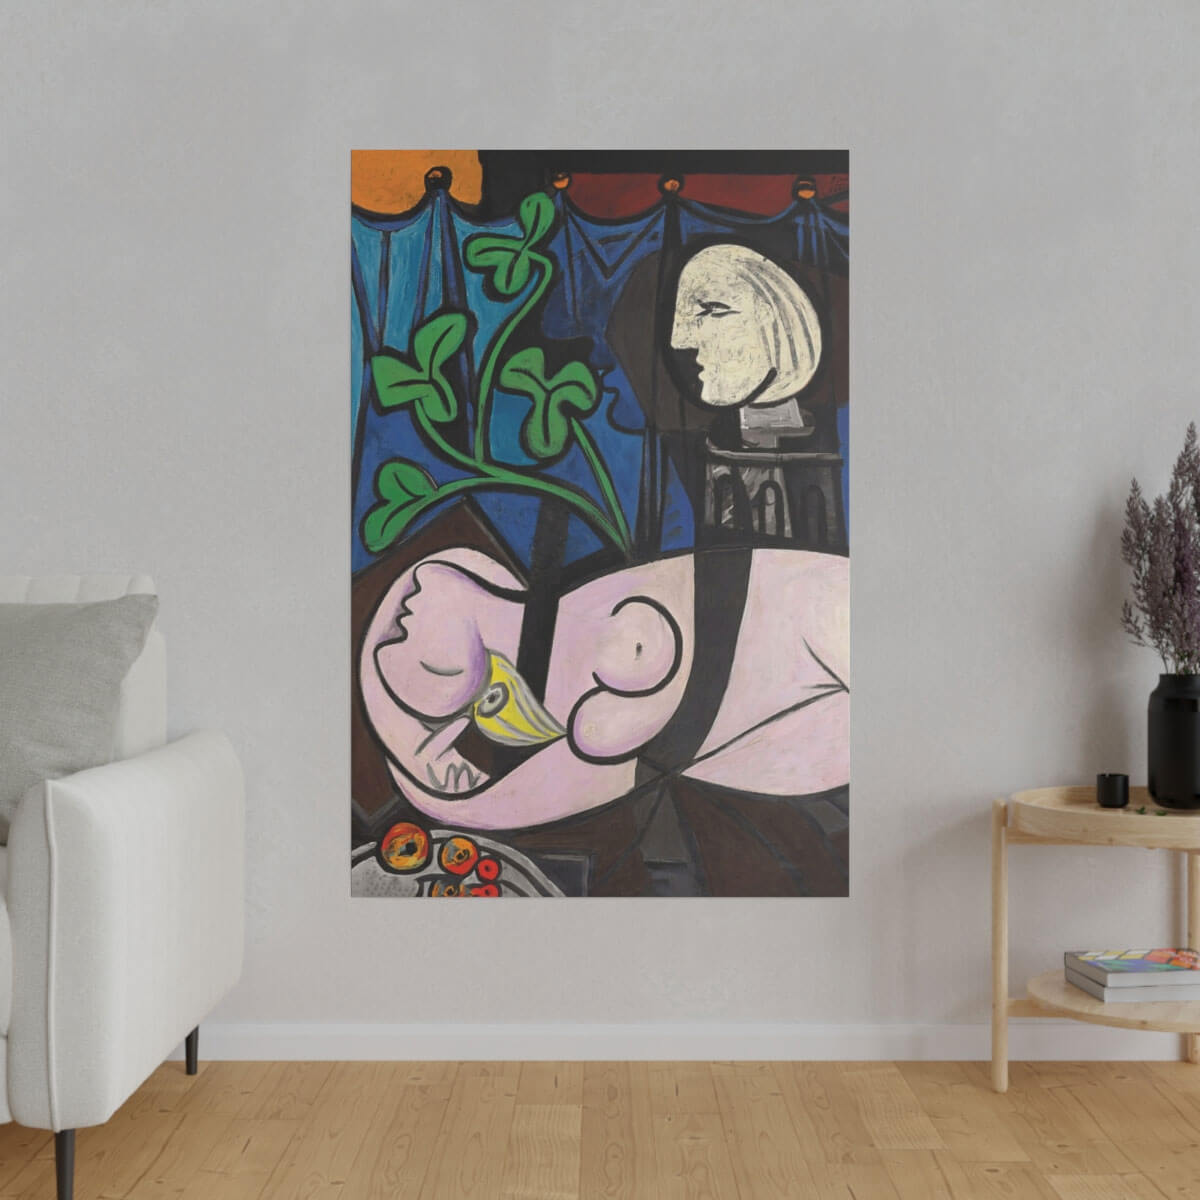 High-quality Canvas of Picasso's inspired art